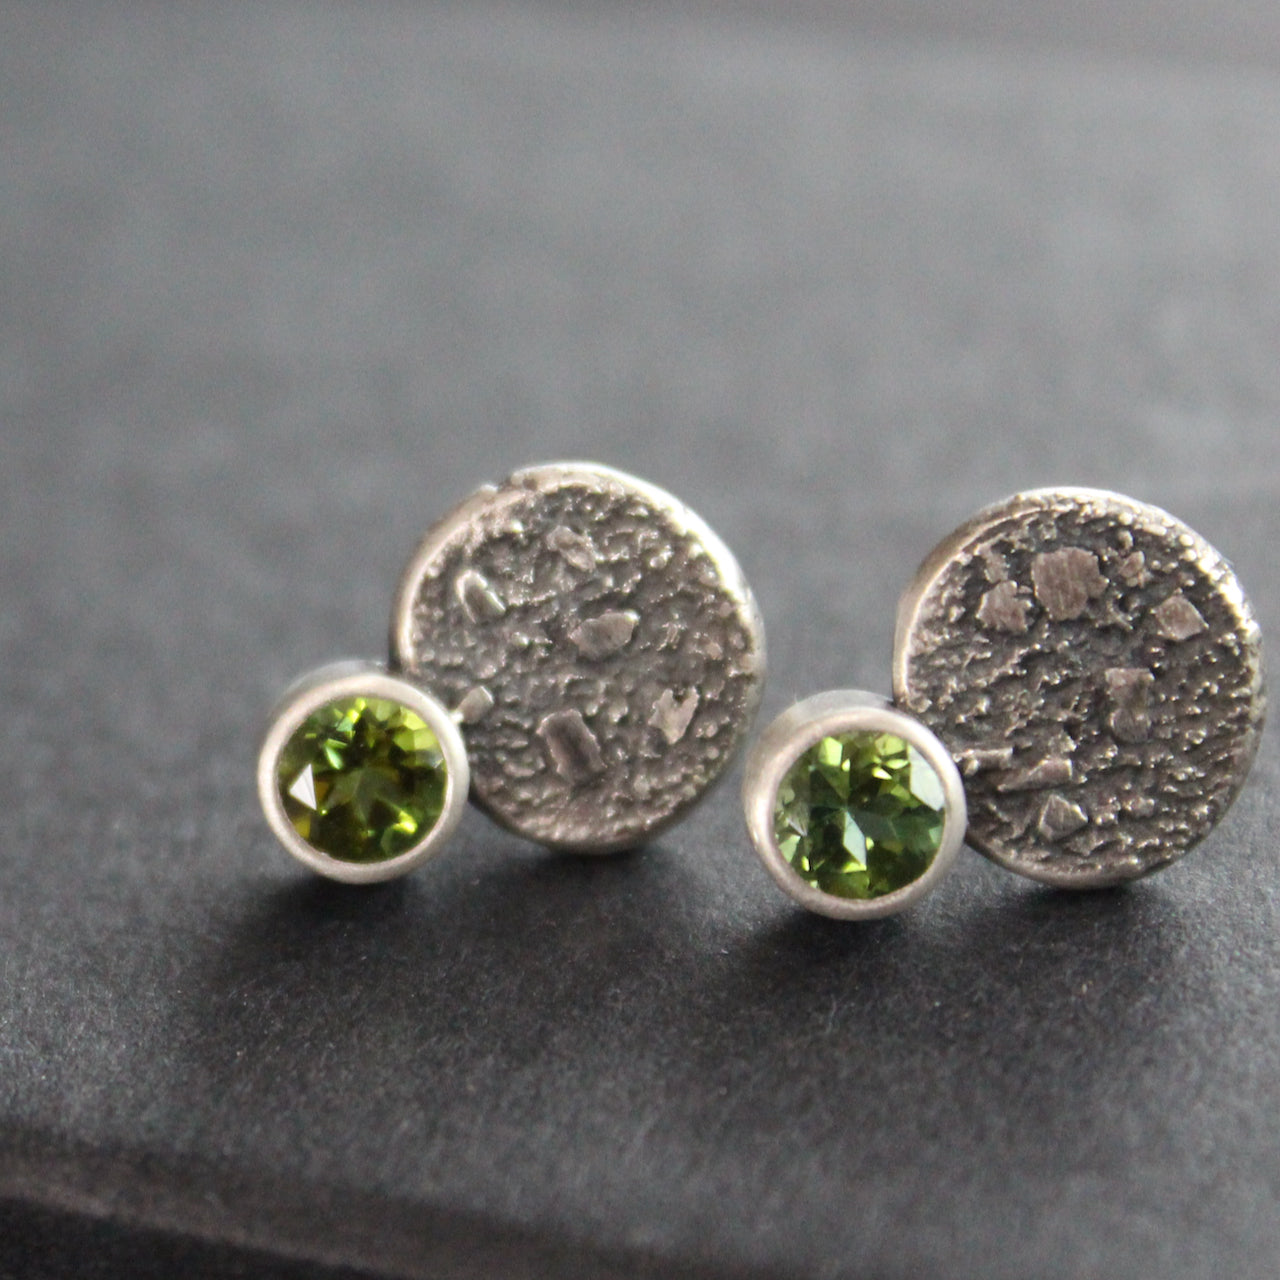 Carin Lindberg - Green tourmaline stud earrings in textured sterling silver close up